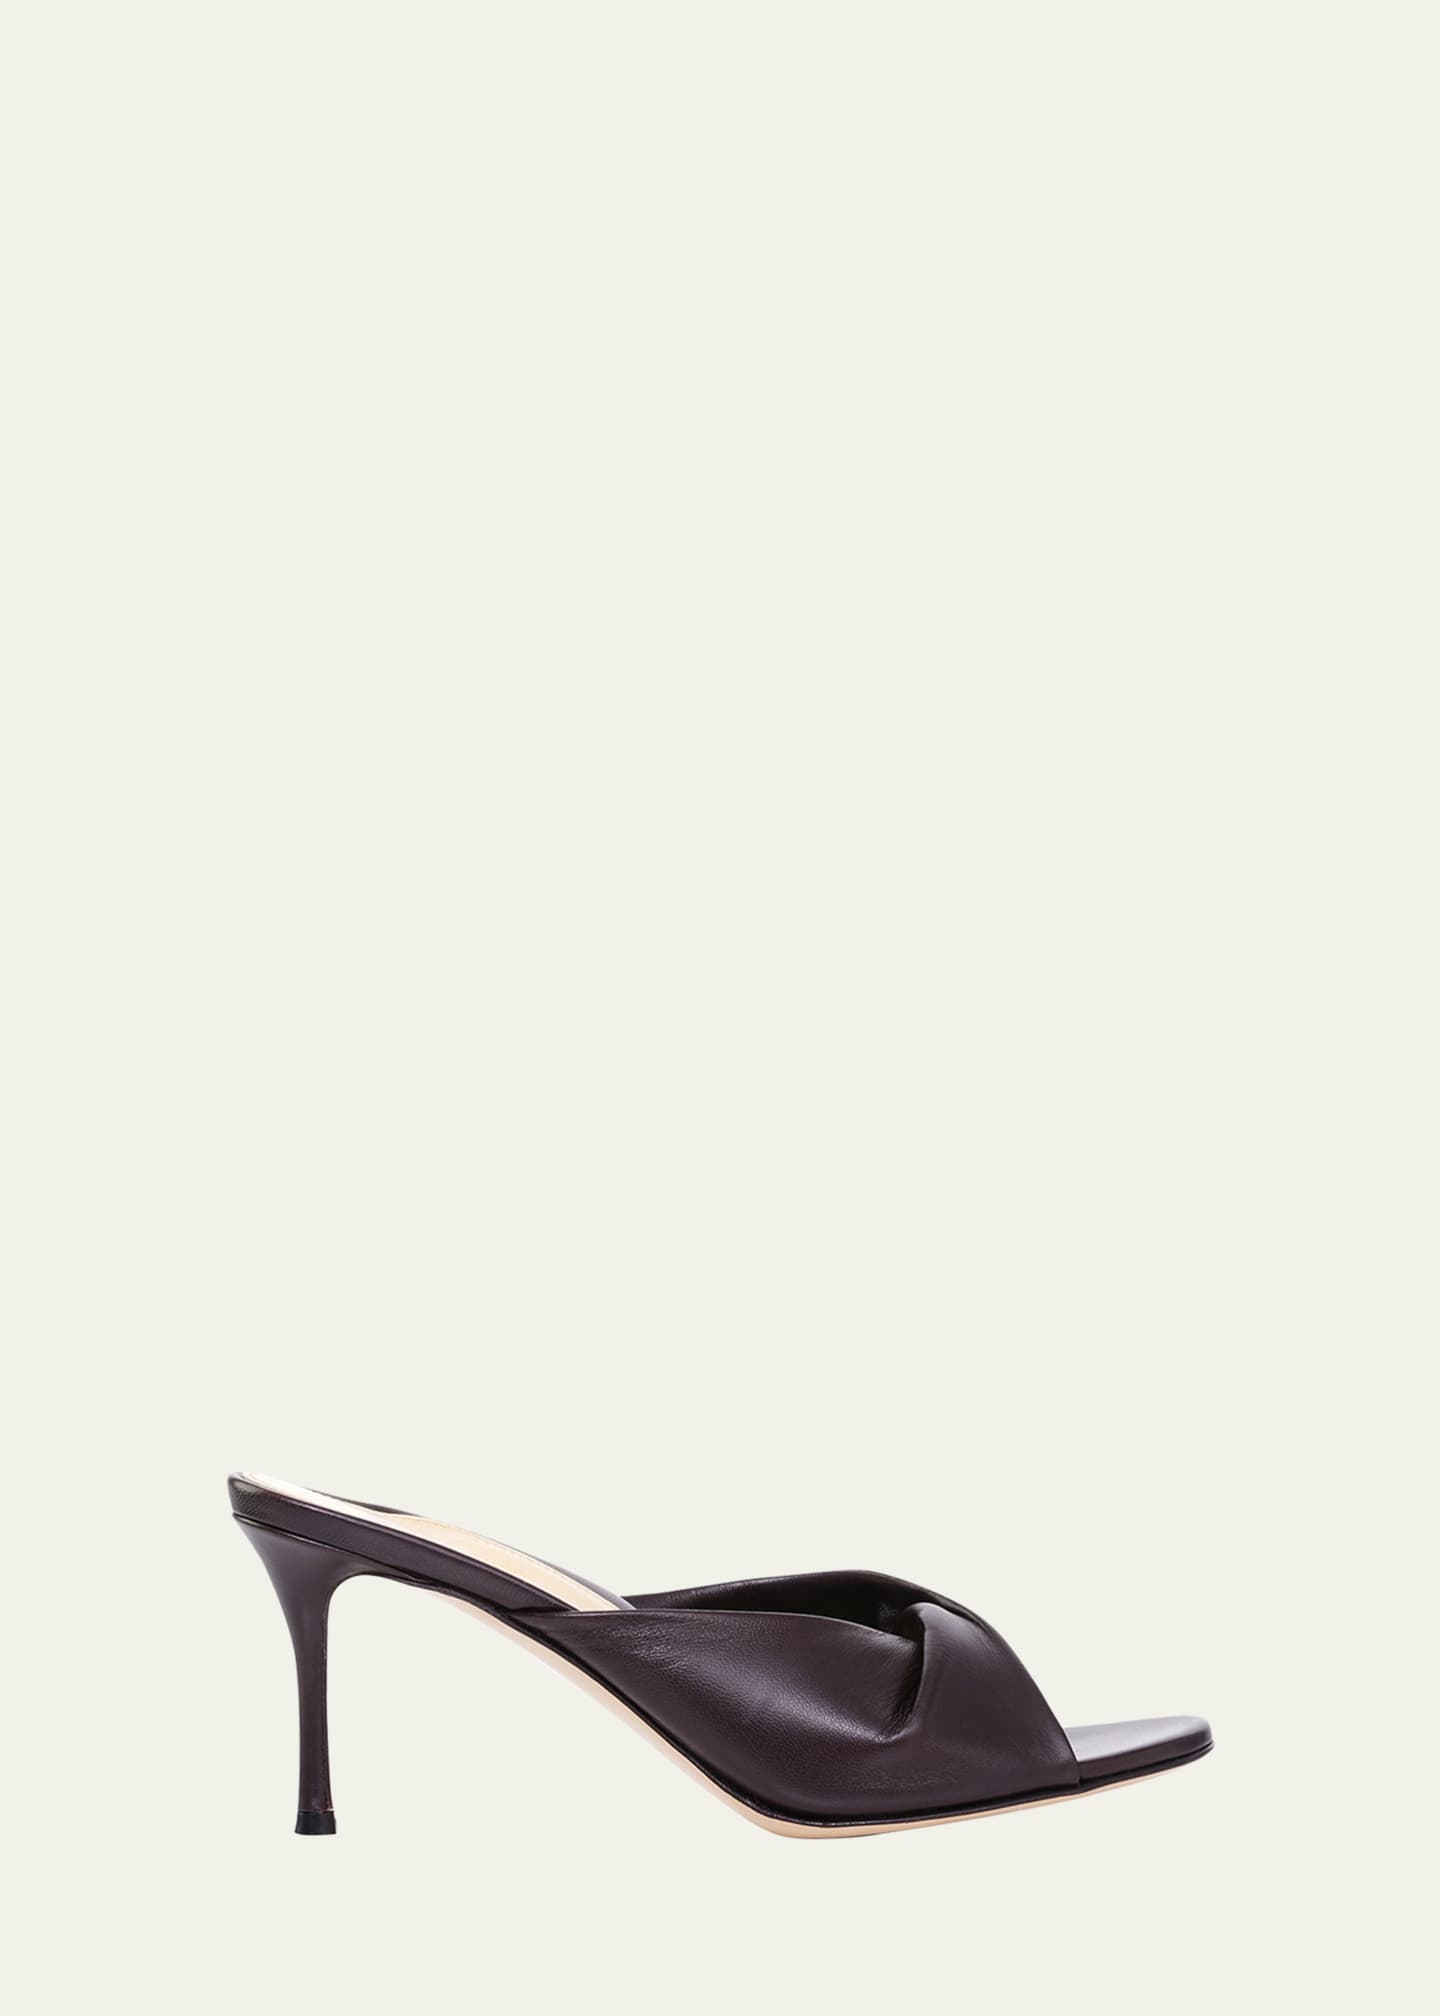 Marion Parke Carrie Twisted Napa Mule Sandals - Bergdorf Goodman